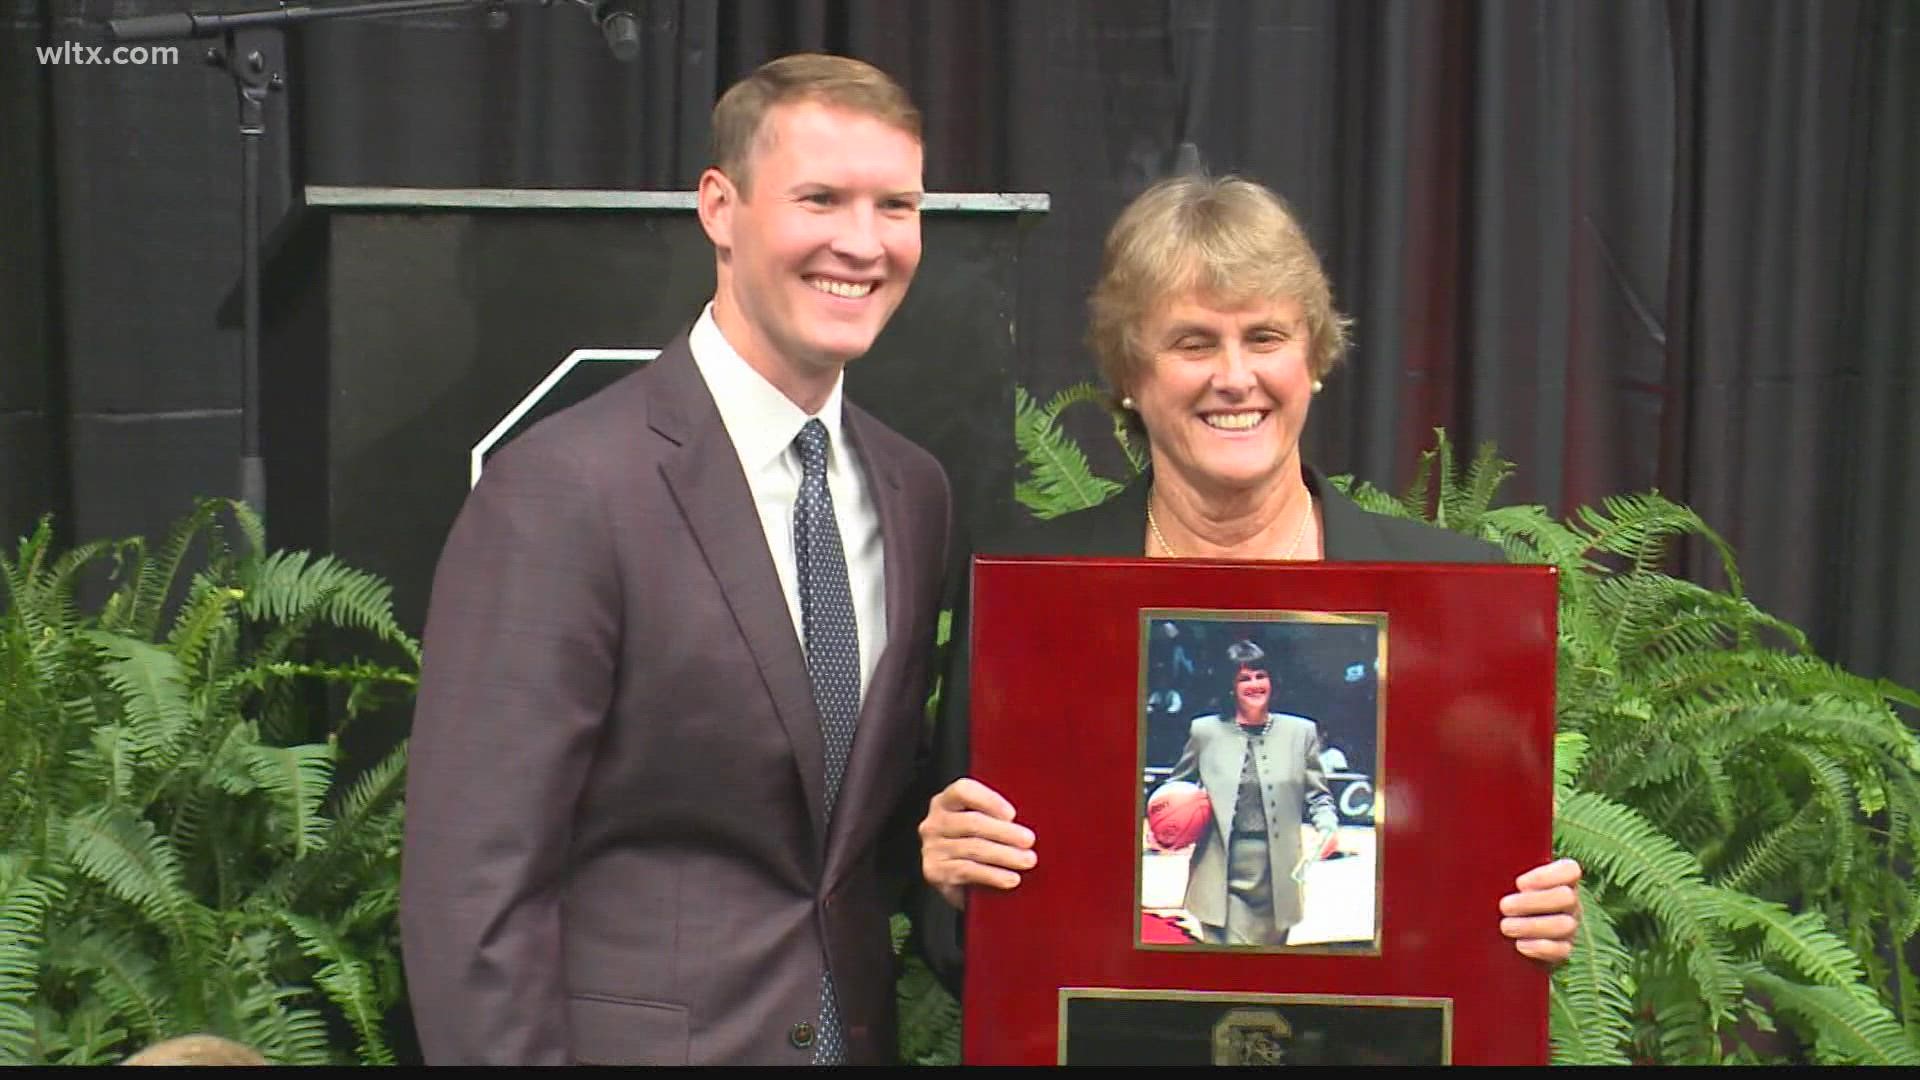 A lot of wins were on the stage at the Cockaboose Club at Williams-Brice as 10 names have been added to the University of South Carolina Athletics Hall of Fame.